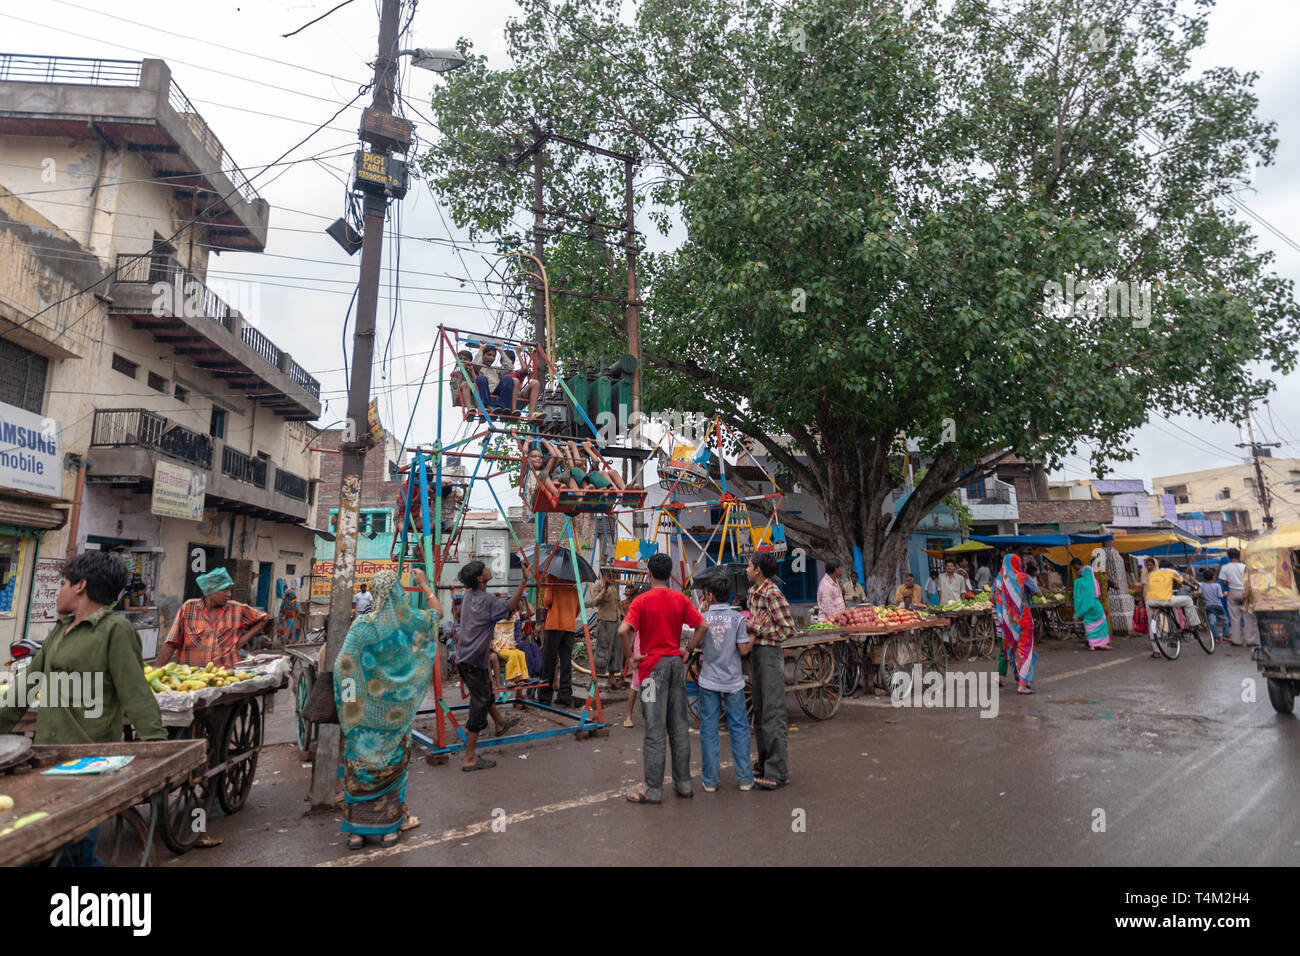 Food stalls in an Agra street with a rudimentary manually operated ferris wheel in Agra, Uttar Pradesh, India Stock Photo